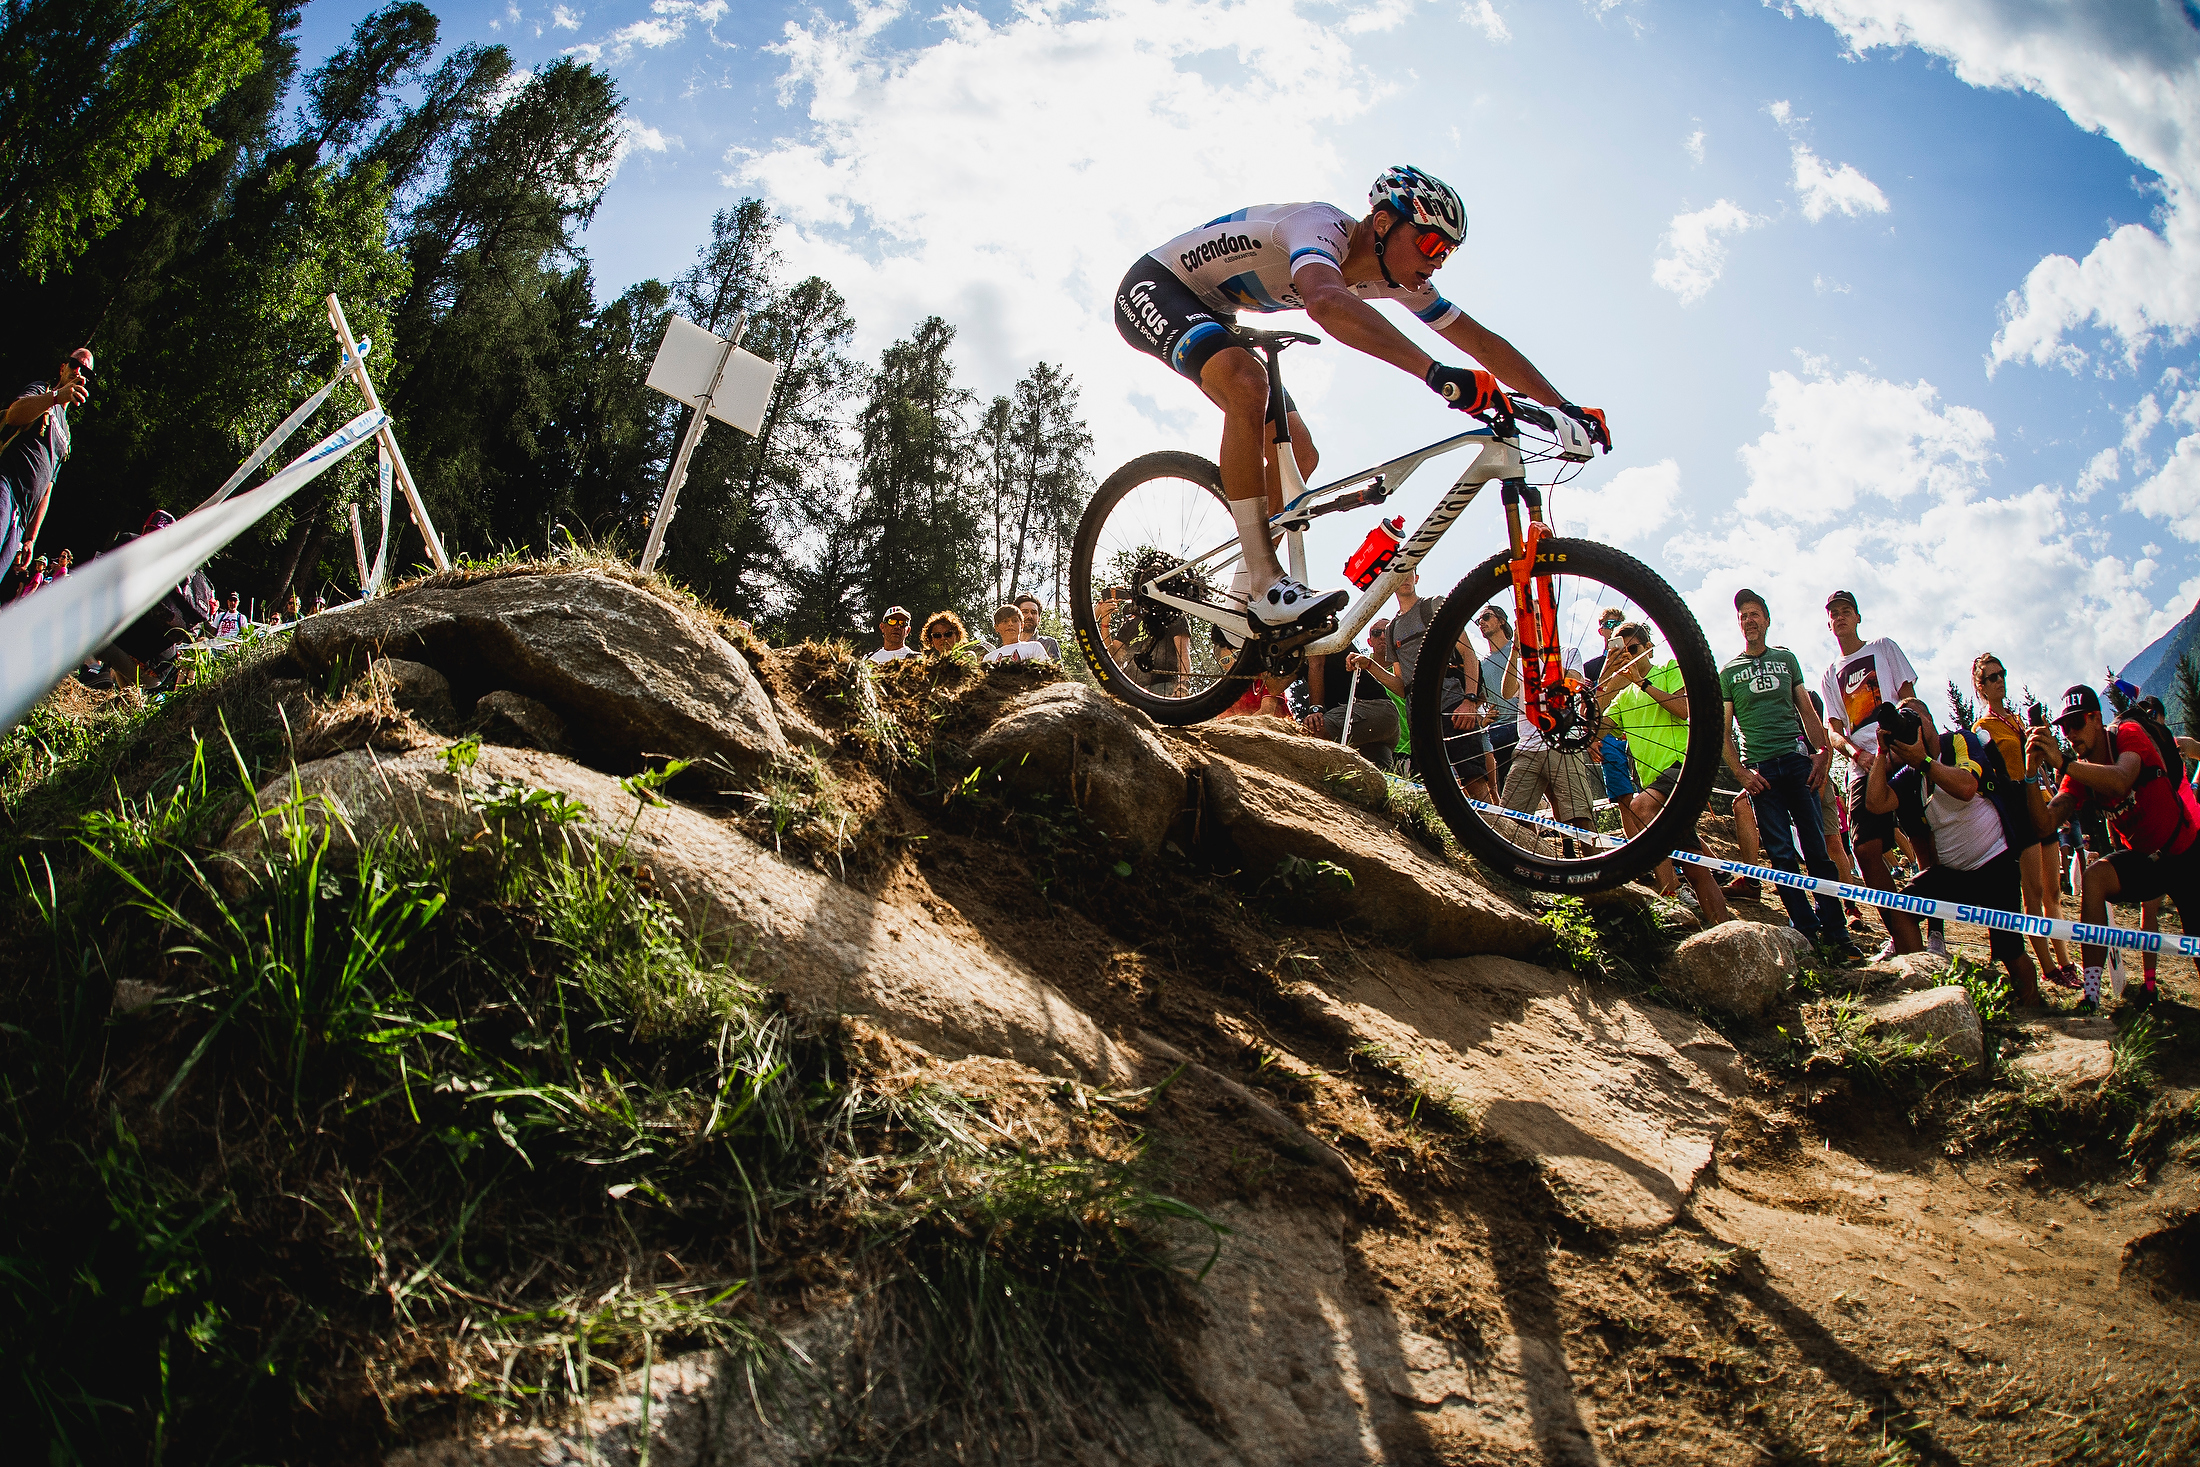 Mathieu Van der Poel leans back and points the bike downhill over some large rocks.